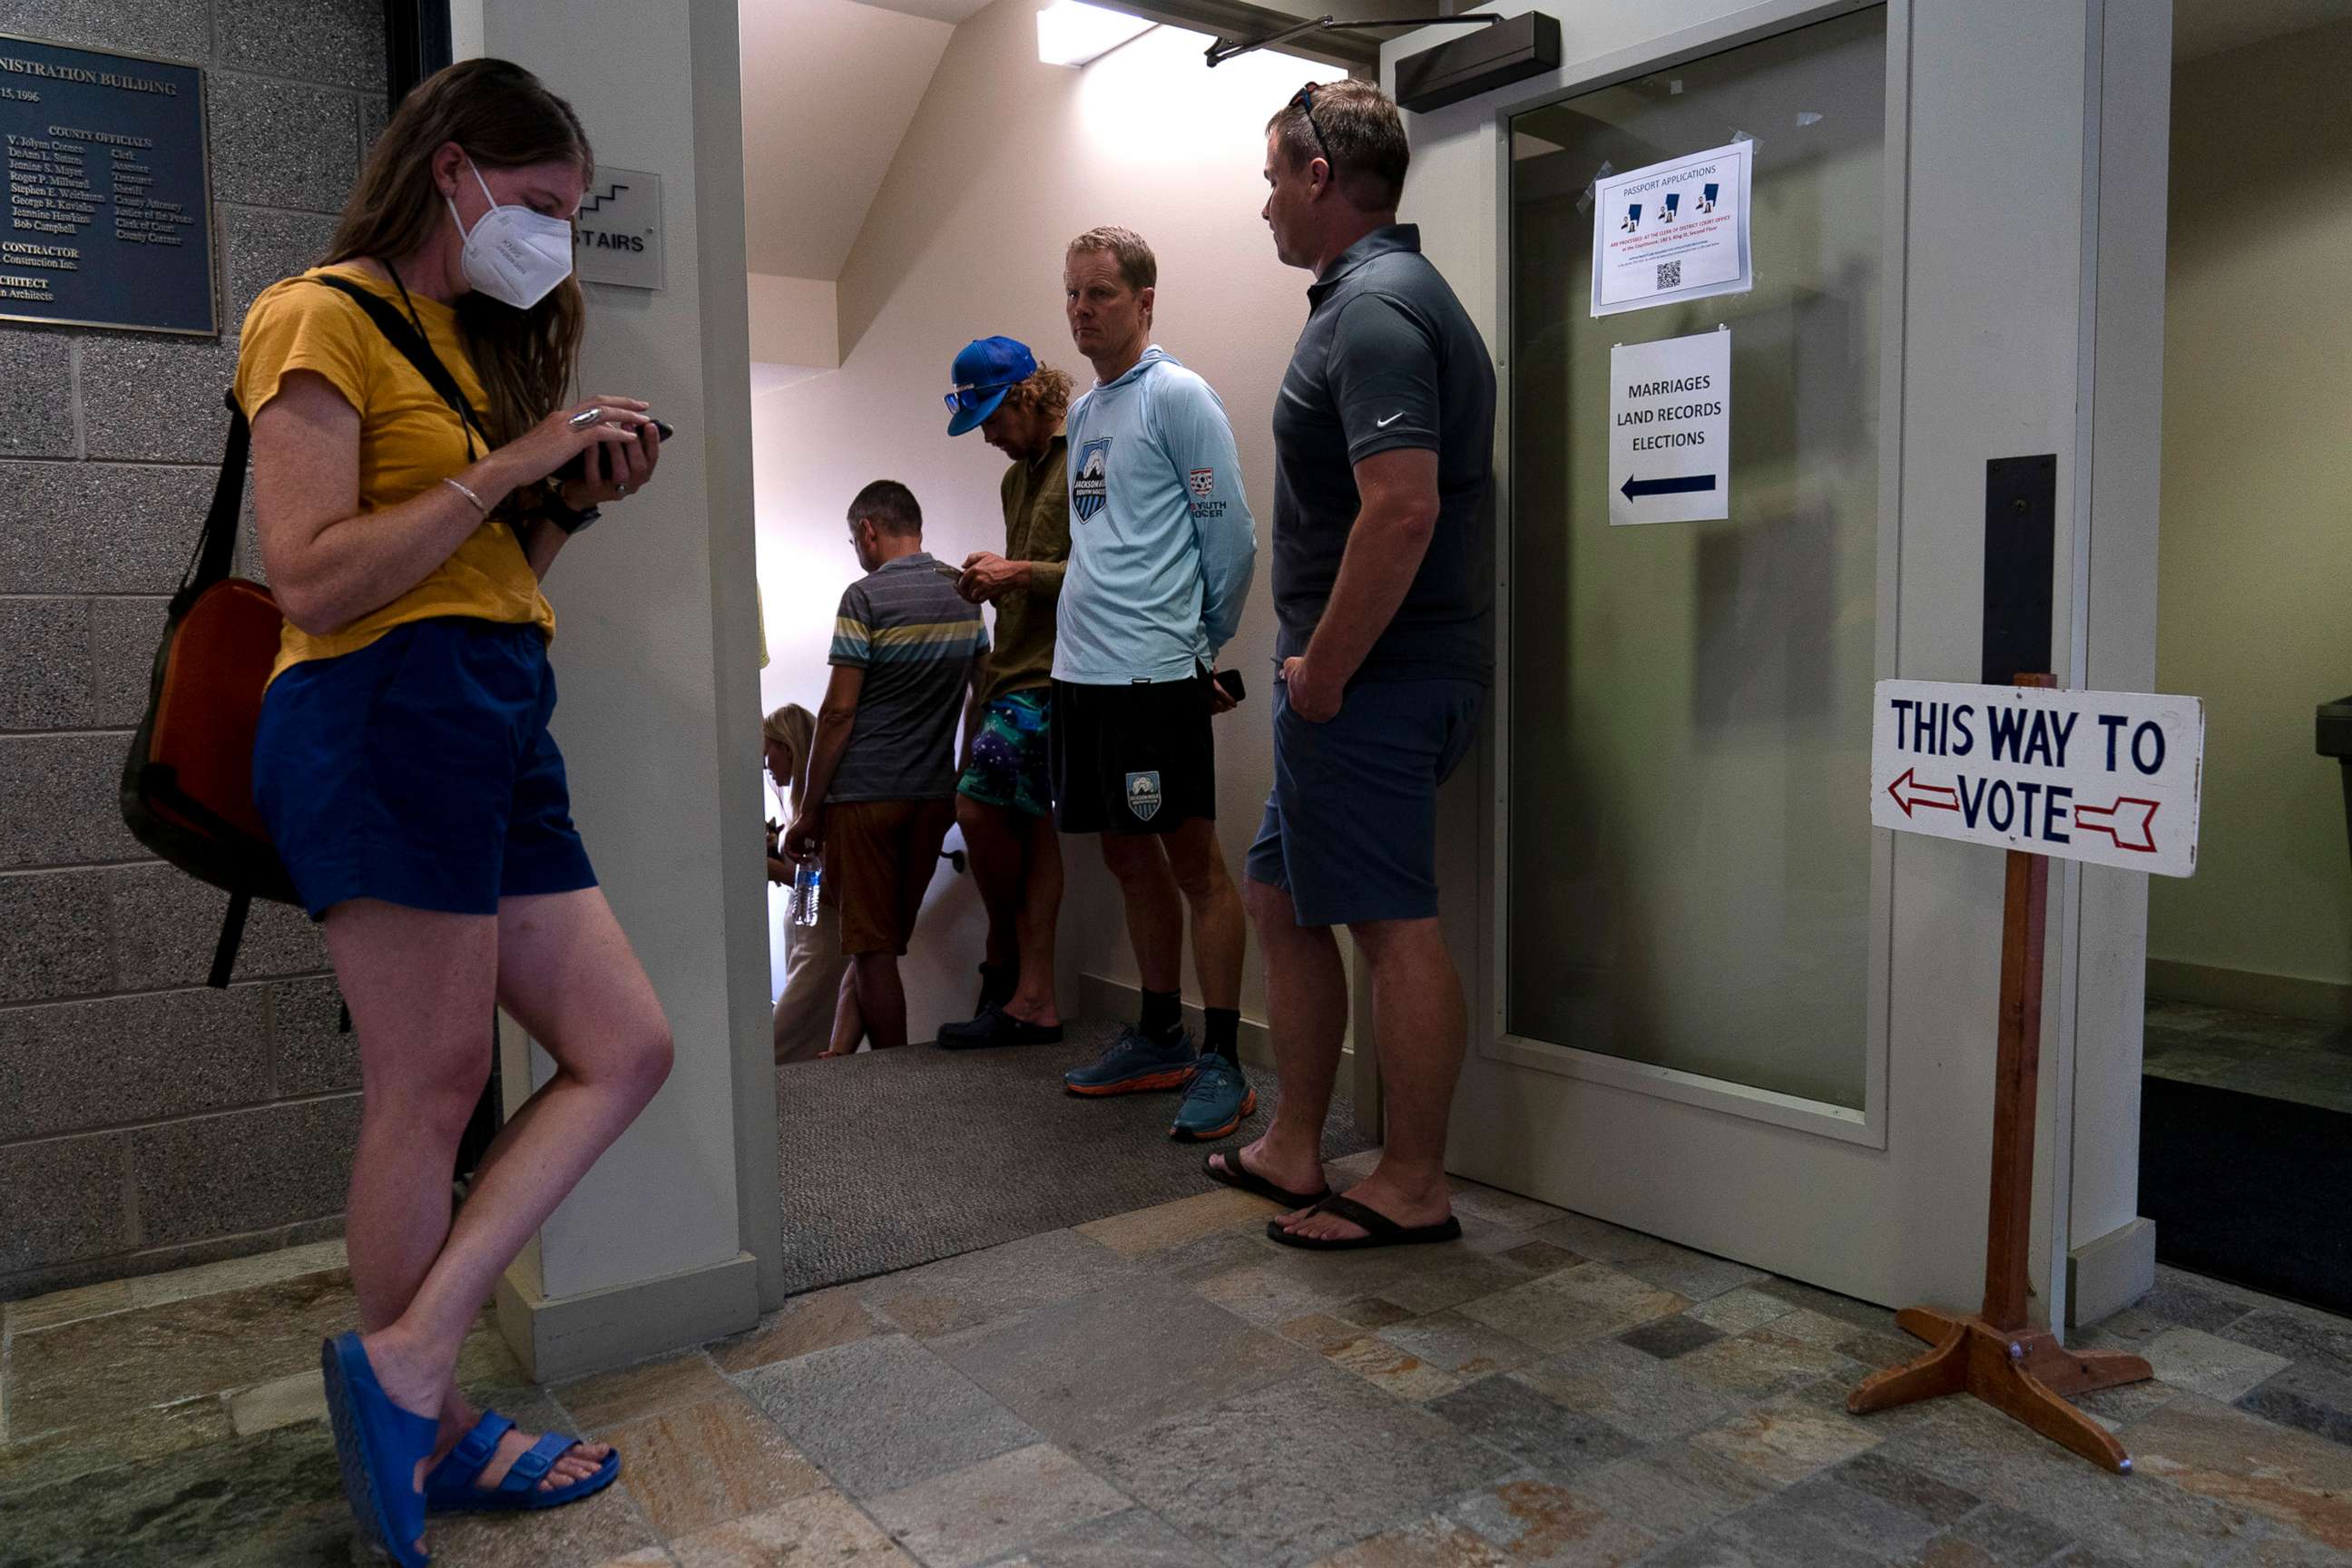 PHOTO: People wait in line to vote early ahead of Tuesday's Republican primary election in Jackson, Wyo., on Aug. 15, 2022.